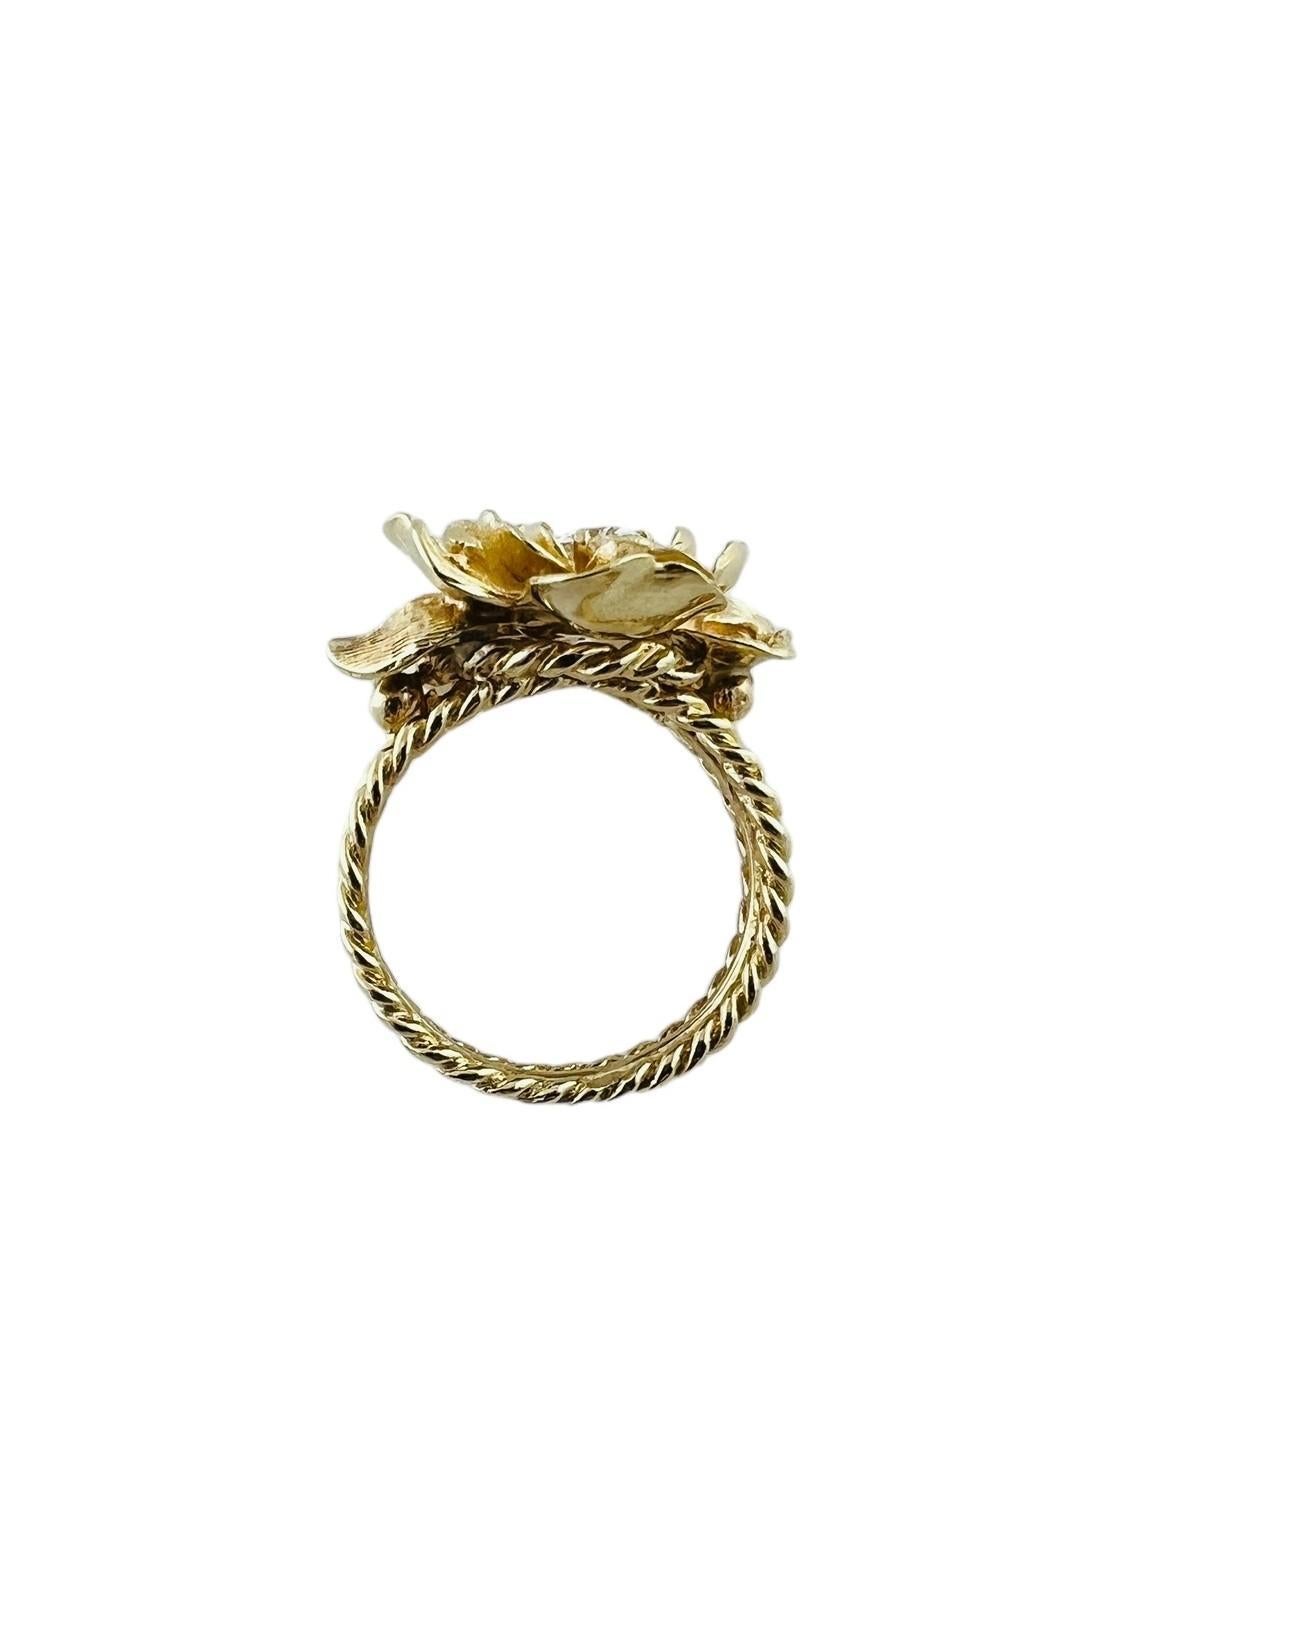 14K Yellow Gold Flower Cocktail Ring with Center Diamond

This beautiful ring features a large open yellow gold flower set on a triple band of two cable bands centered with one smooth band

Center round brilliant diamond is approx. 0.30 cts

Diamond